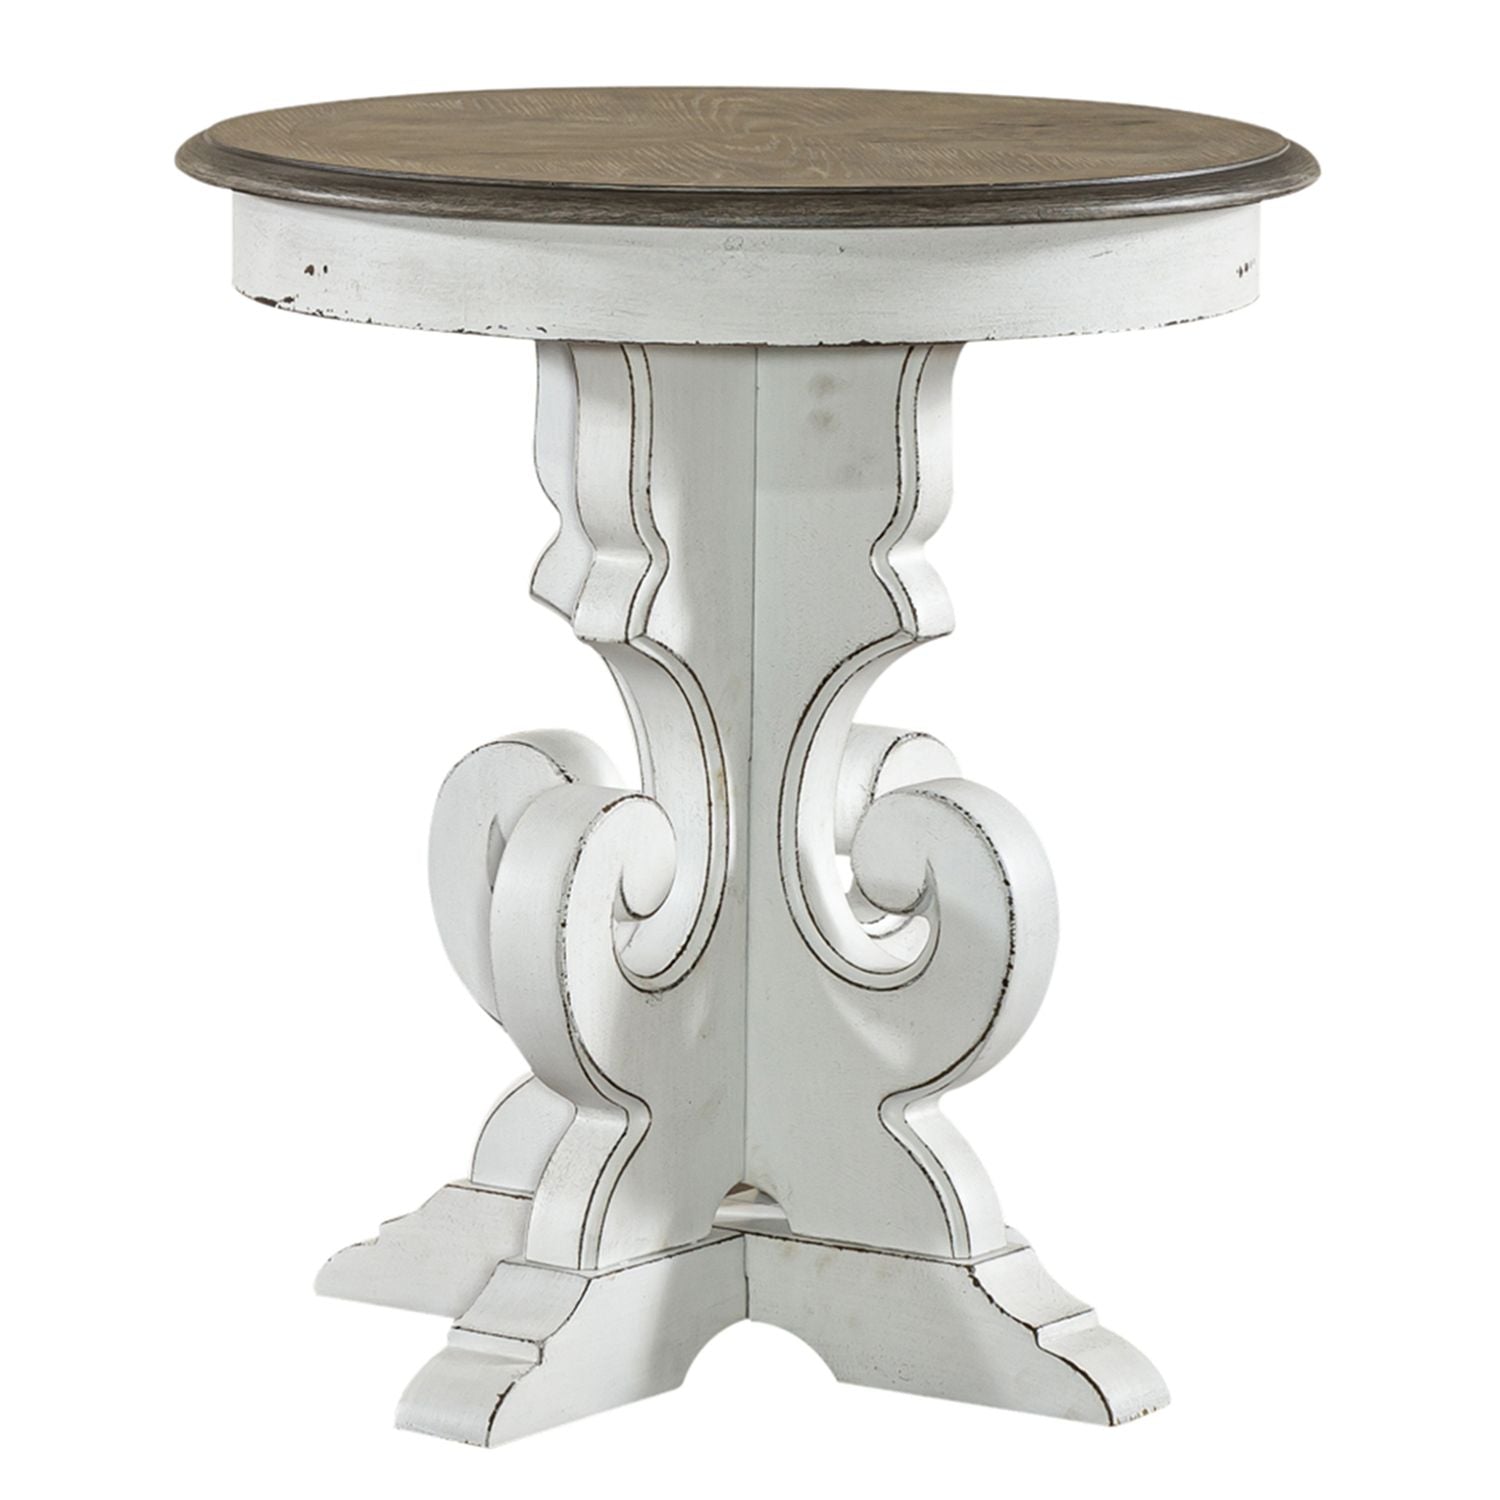 Magnolia Manor Round End Table W22 x D22 x H24